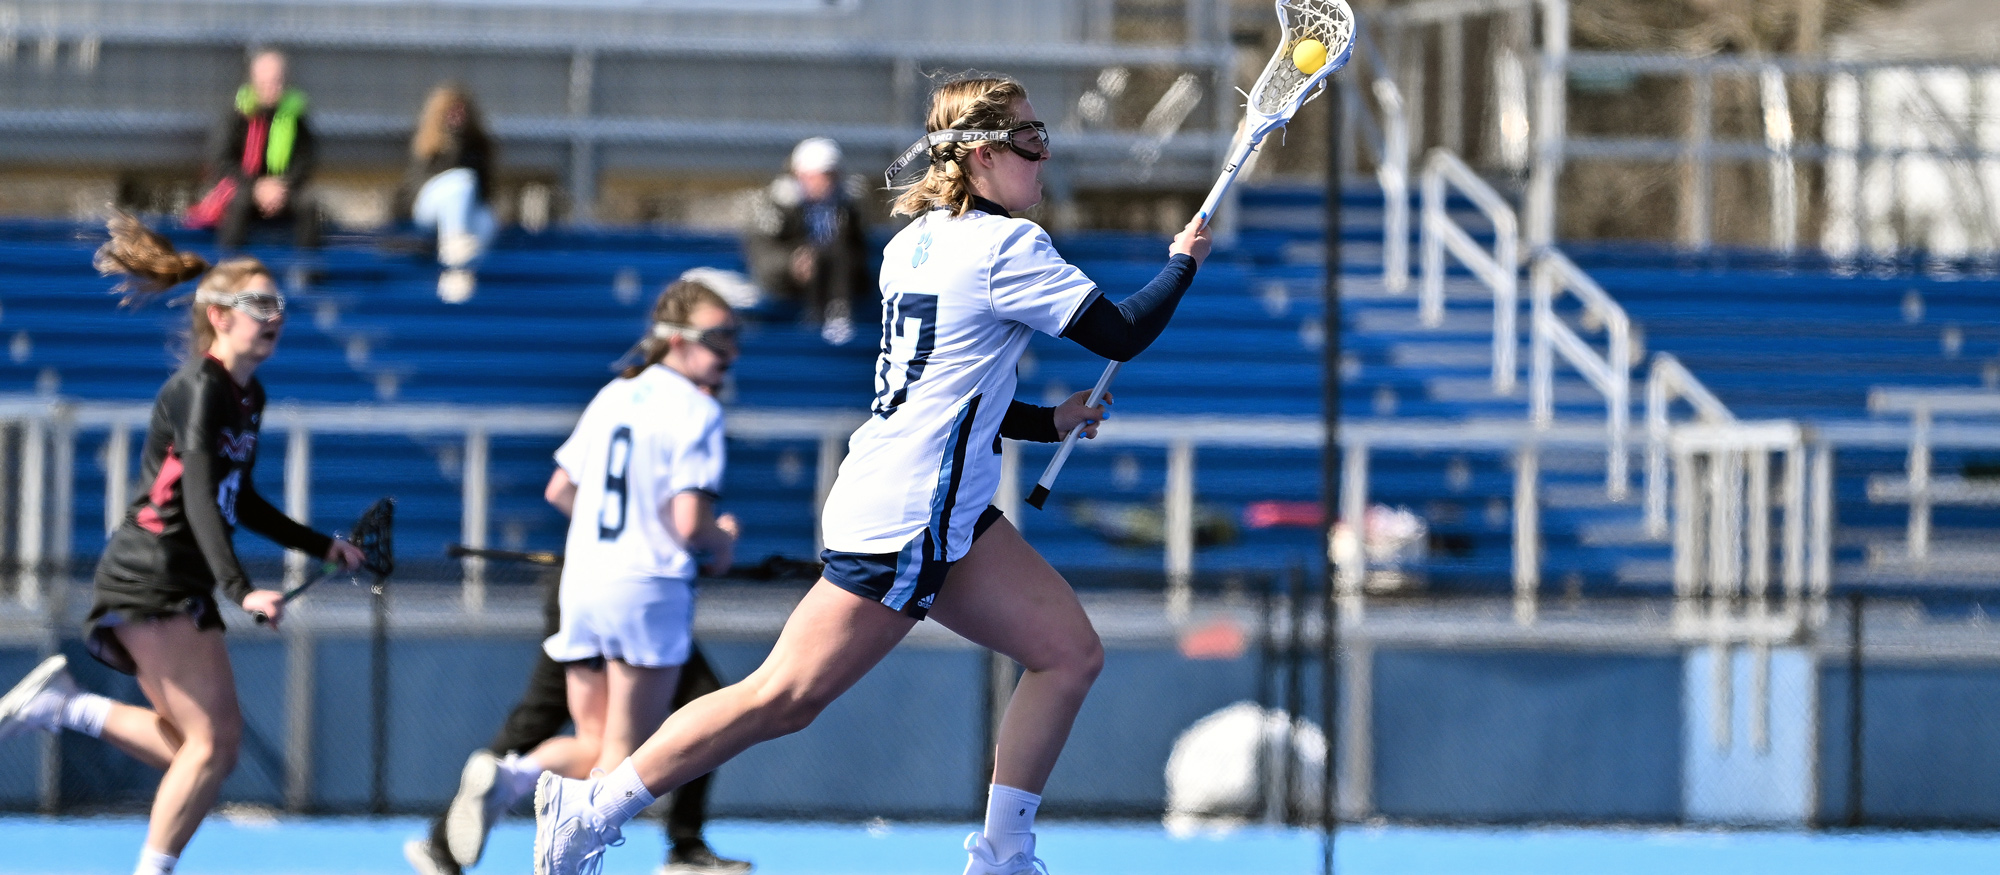 Taylor Dunn had nine ground balls, three caused turnovers and one assist in Mount Holyoke's 12-11 loss to Fitchburg State on March 29, 2023. (RJB Sports file photo)